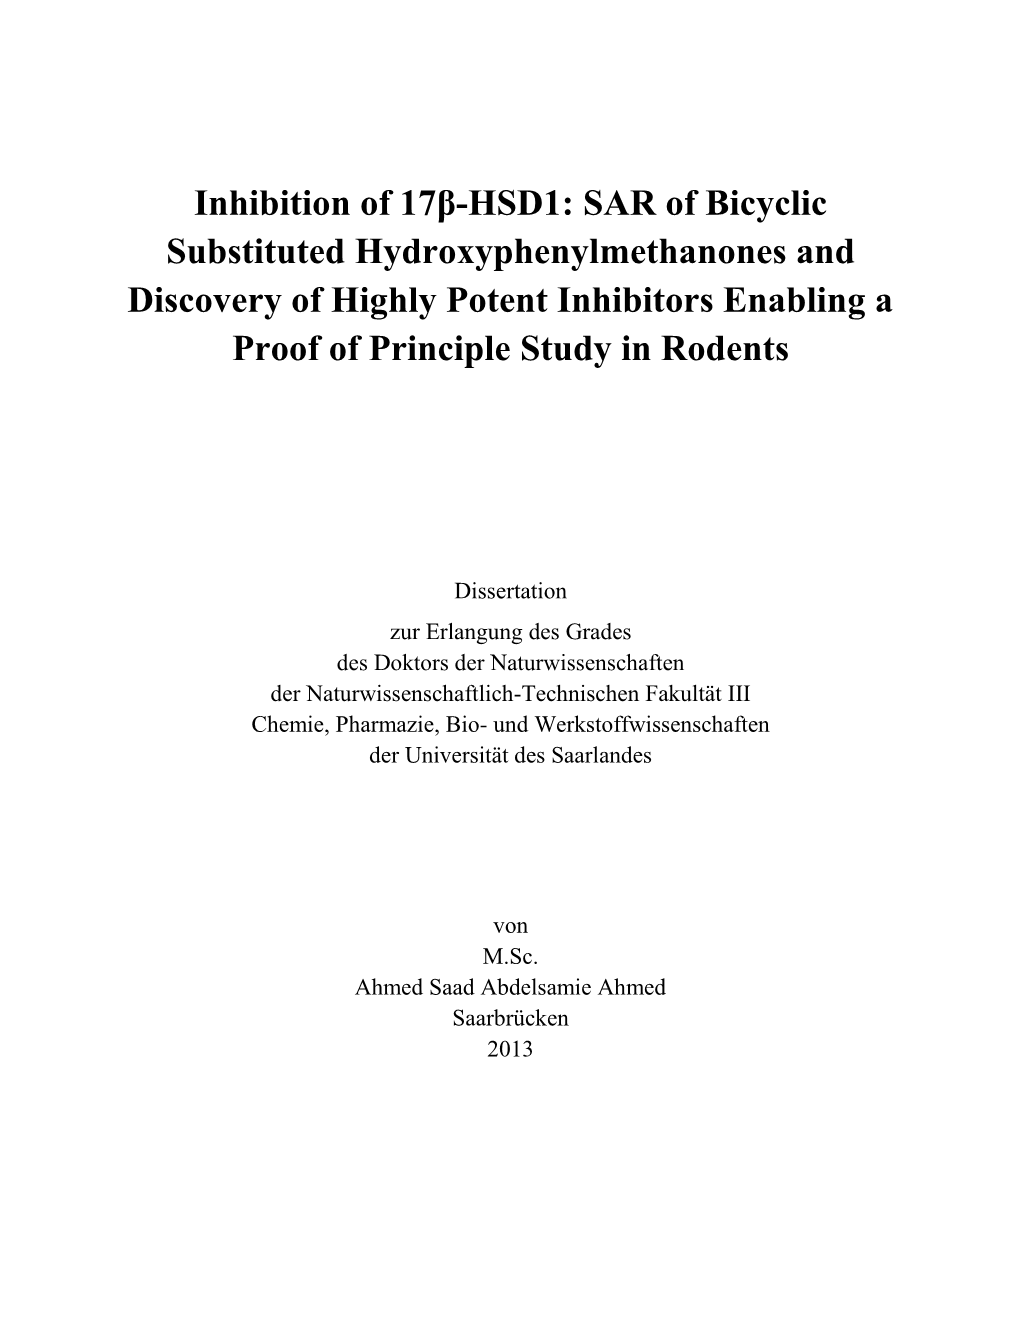 Inhibition of 17Β-HSD1: SAR of Bicyclic Substituted Hydroxyphenylmethanones and Discovery of Highly Potent Inhibitors Enabling a Proof of Principle Study in Rodents